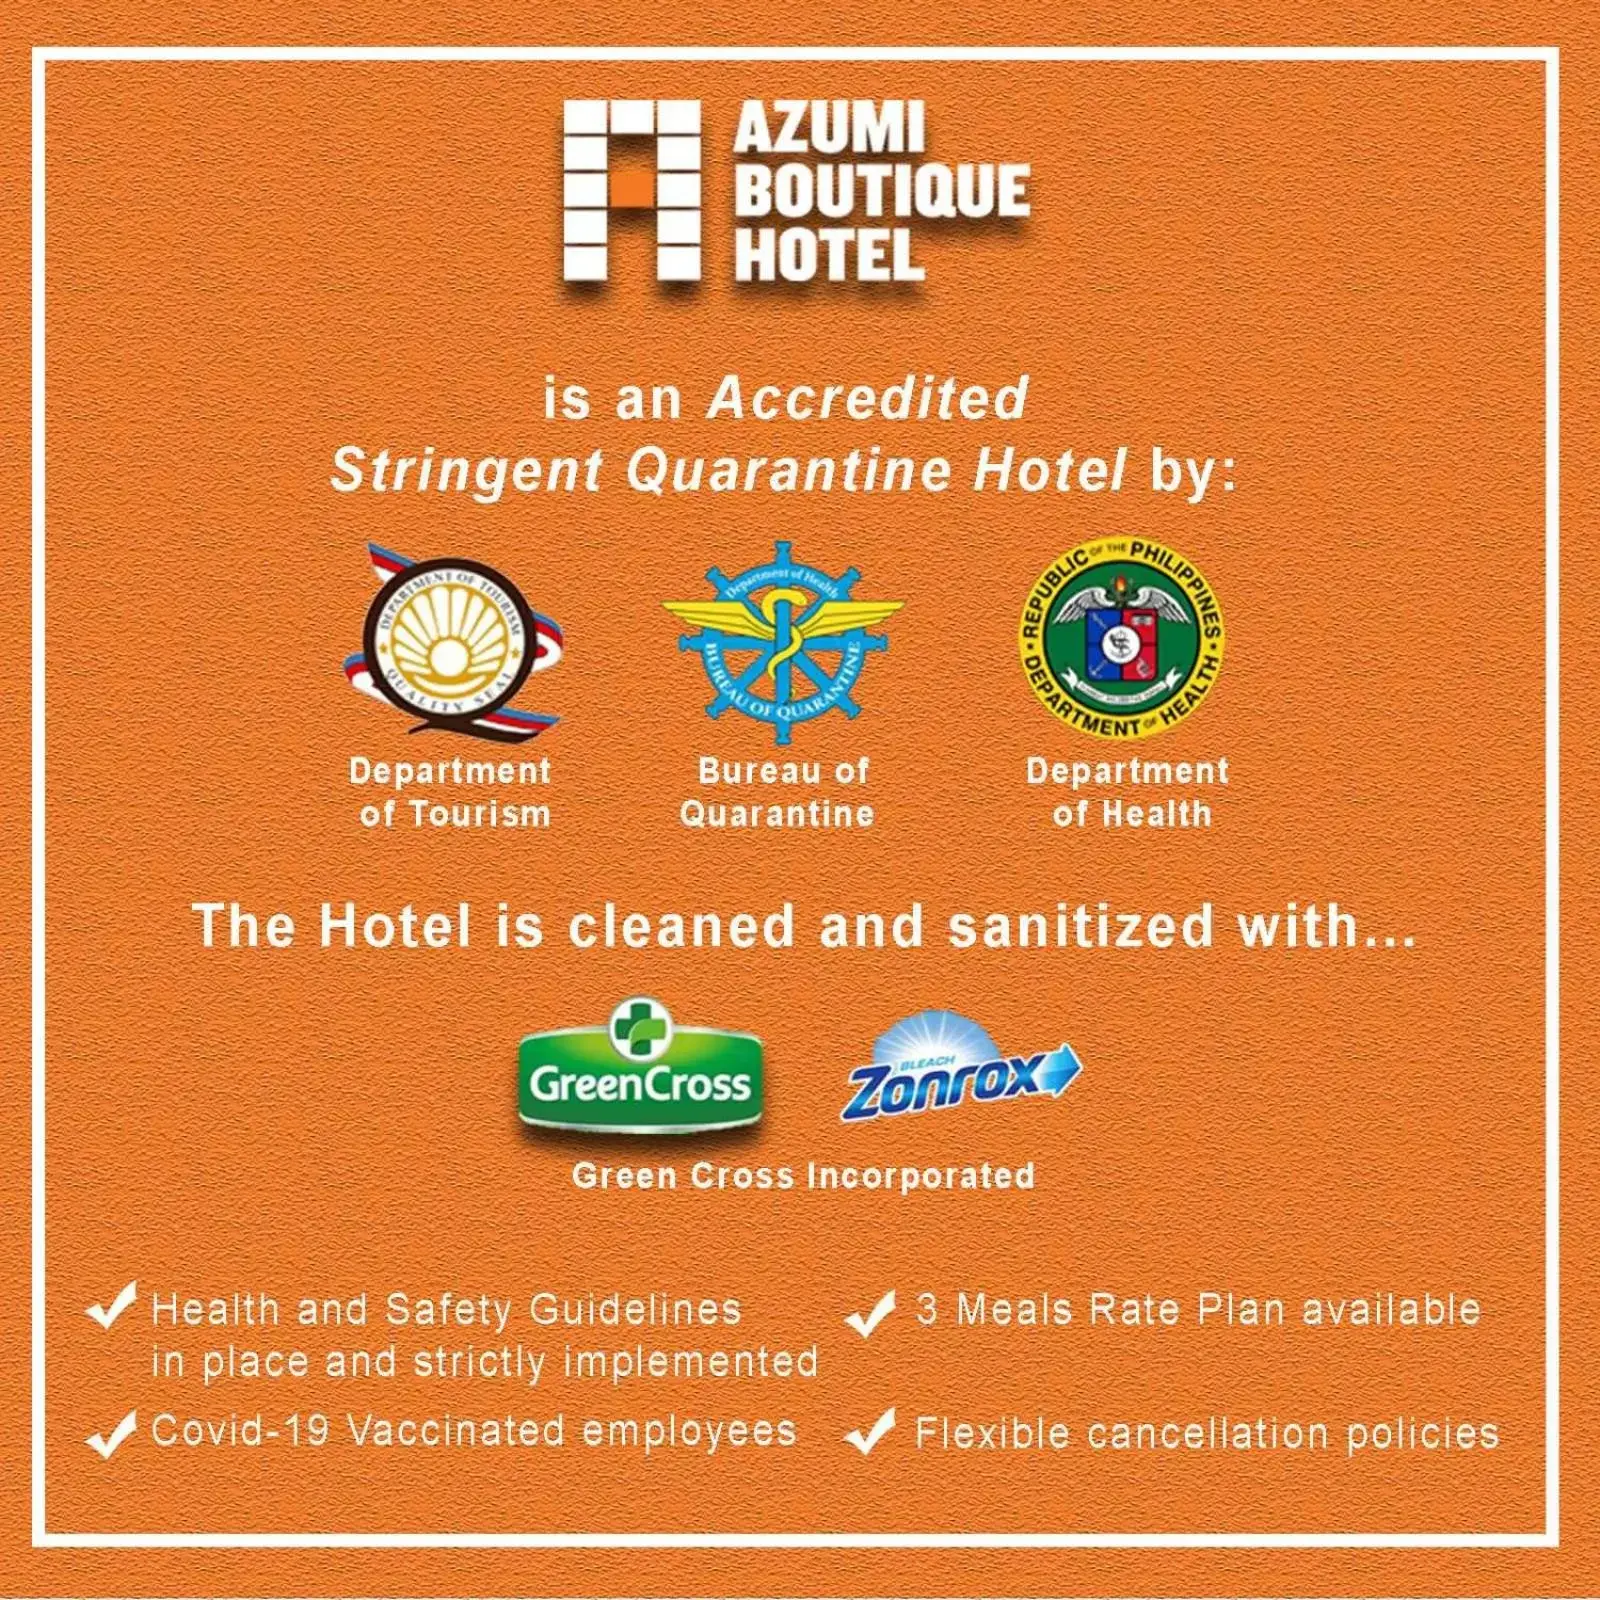 Property building in Azumi Boutique Hotel, Multiple Use Hotel Staycation Approved